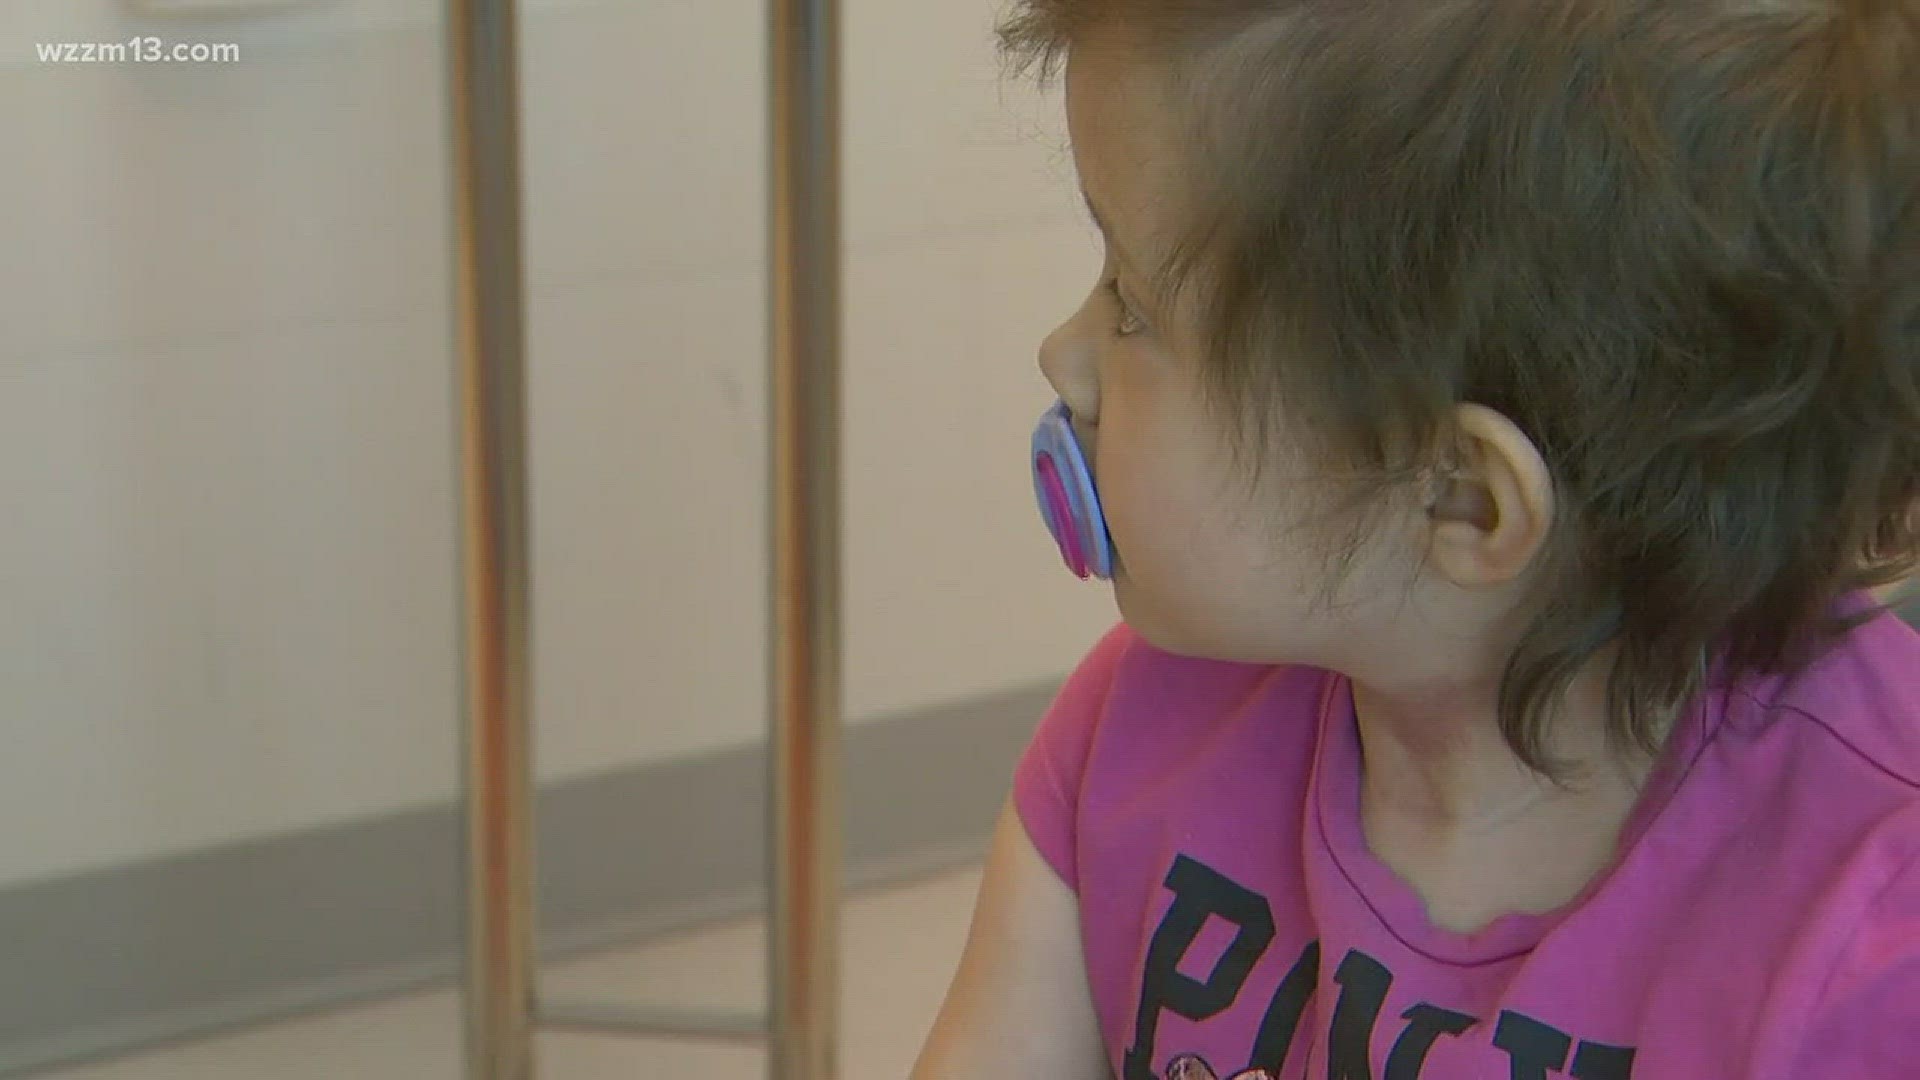 A 5-year-old girl came from Wales to Grand Rapids for a clinical trial.